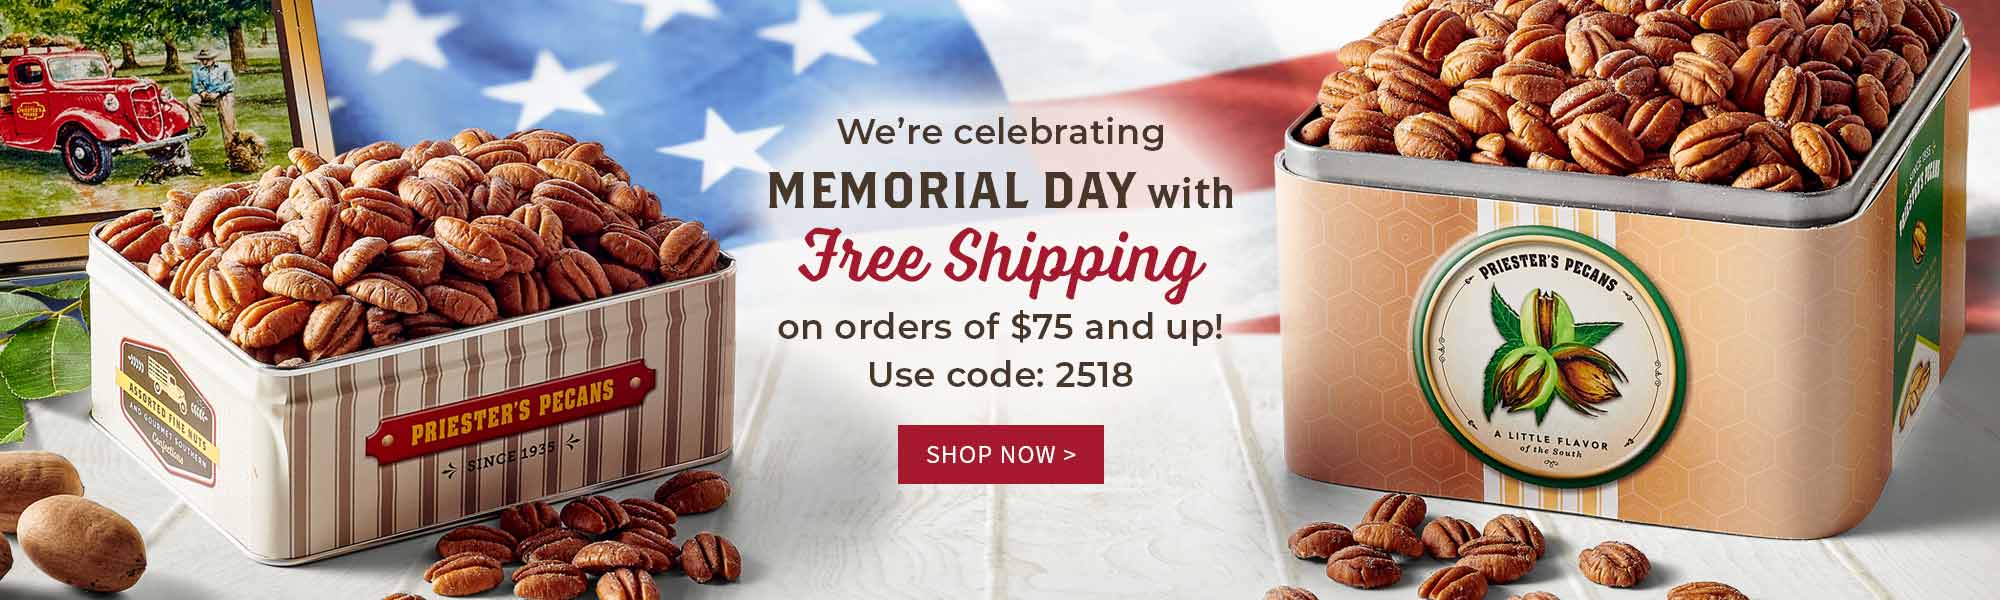 We're celebrating MEMORIAL DAY with Free Shipping on orders of  and up! Use code: 2518